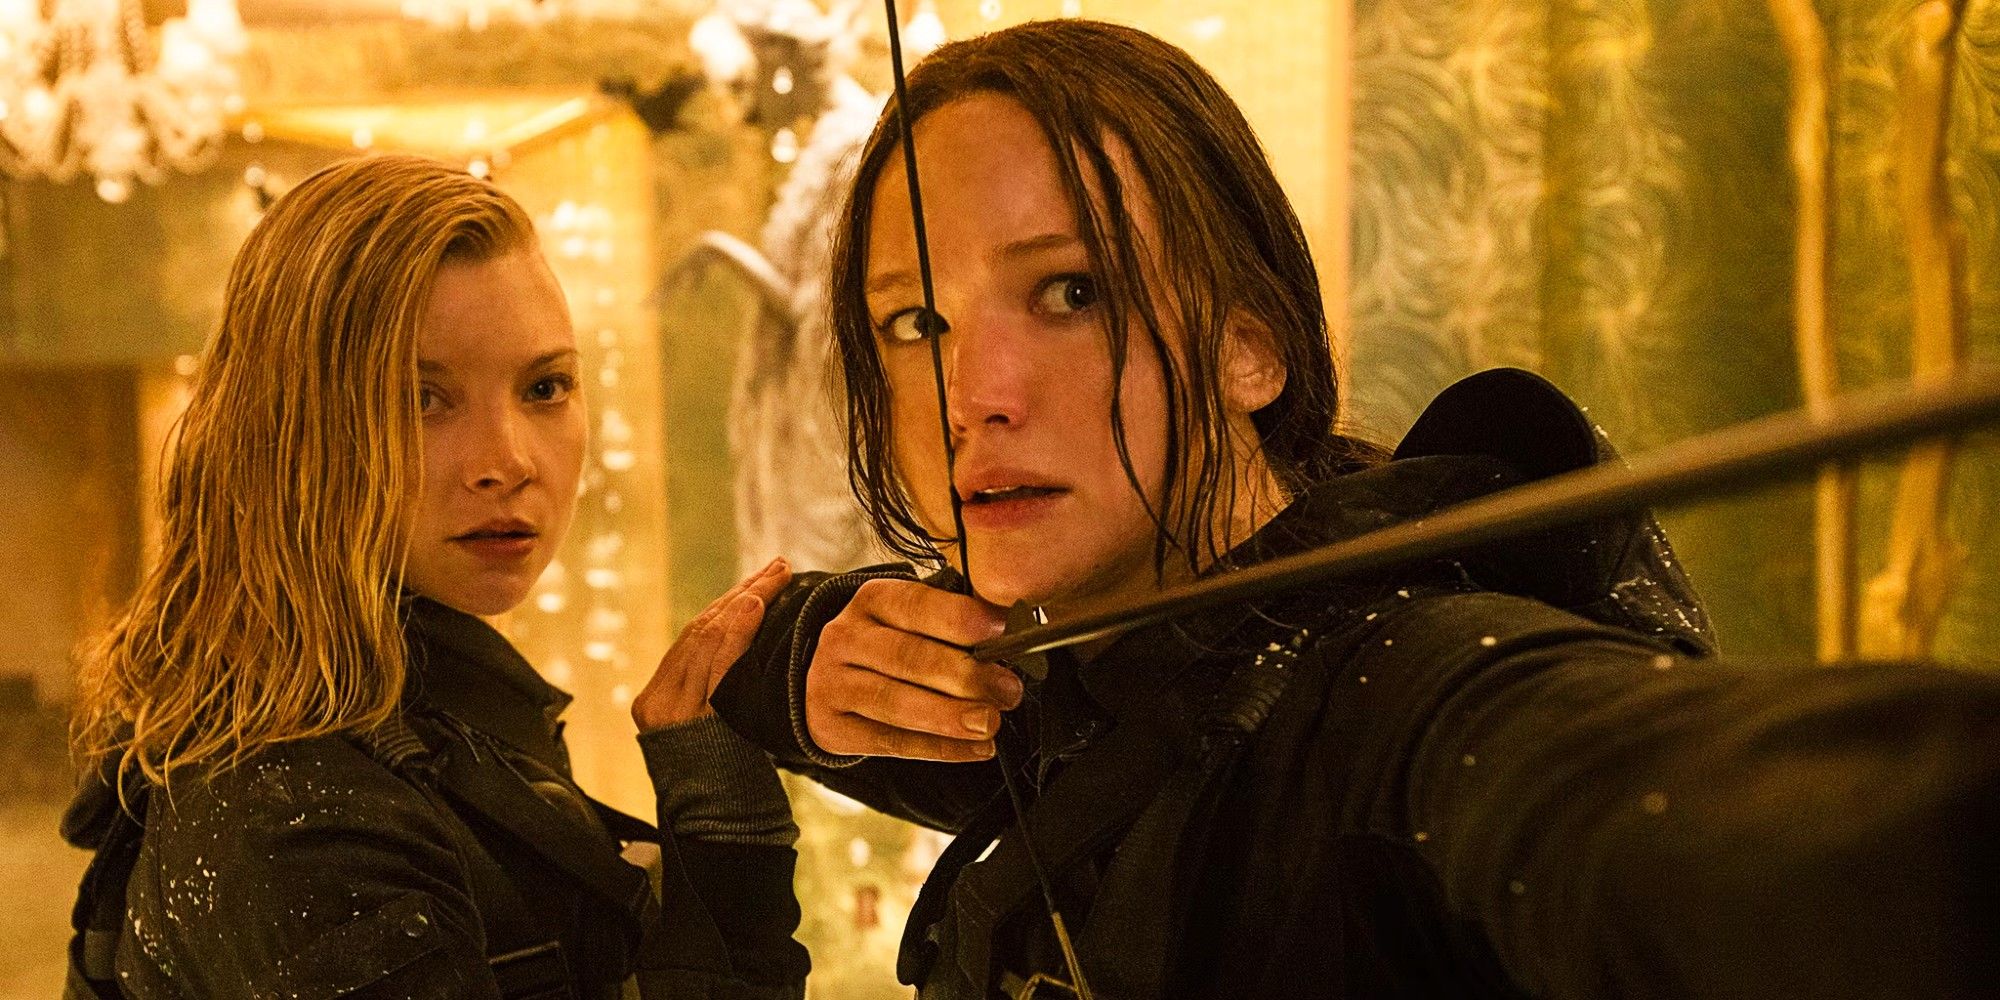 Hunger Games Prequel's Runtime Will Be Longer Than Previous Movies